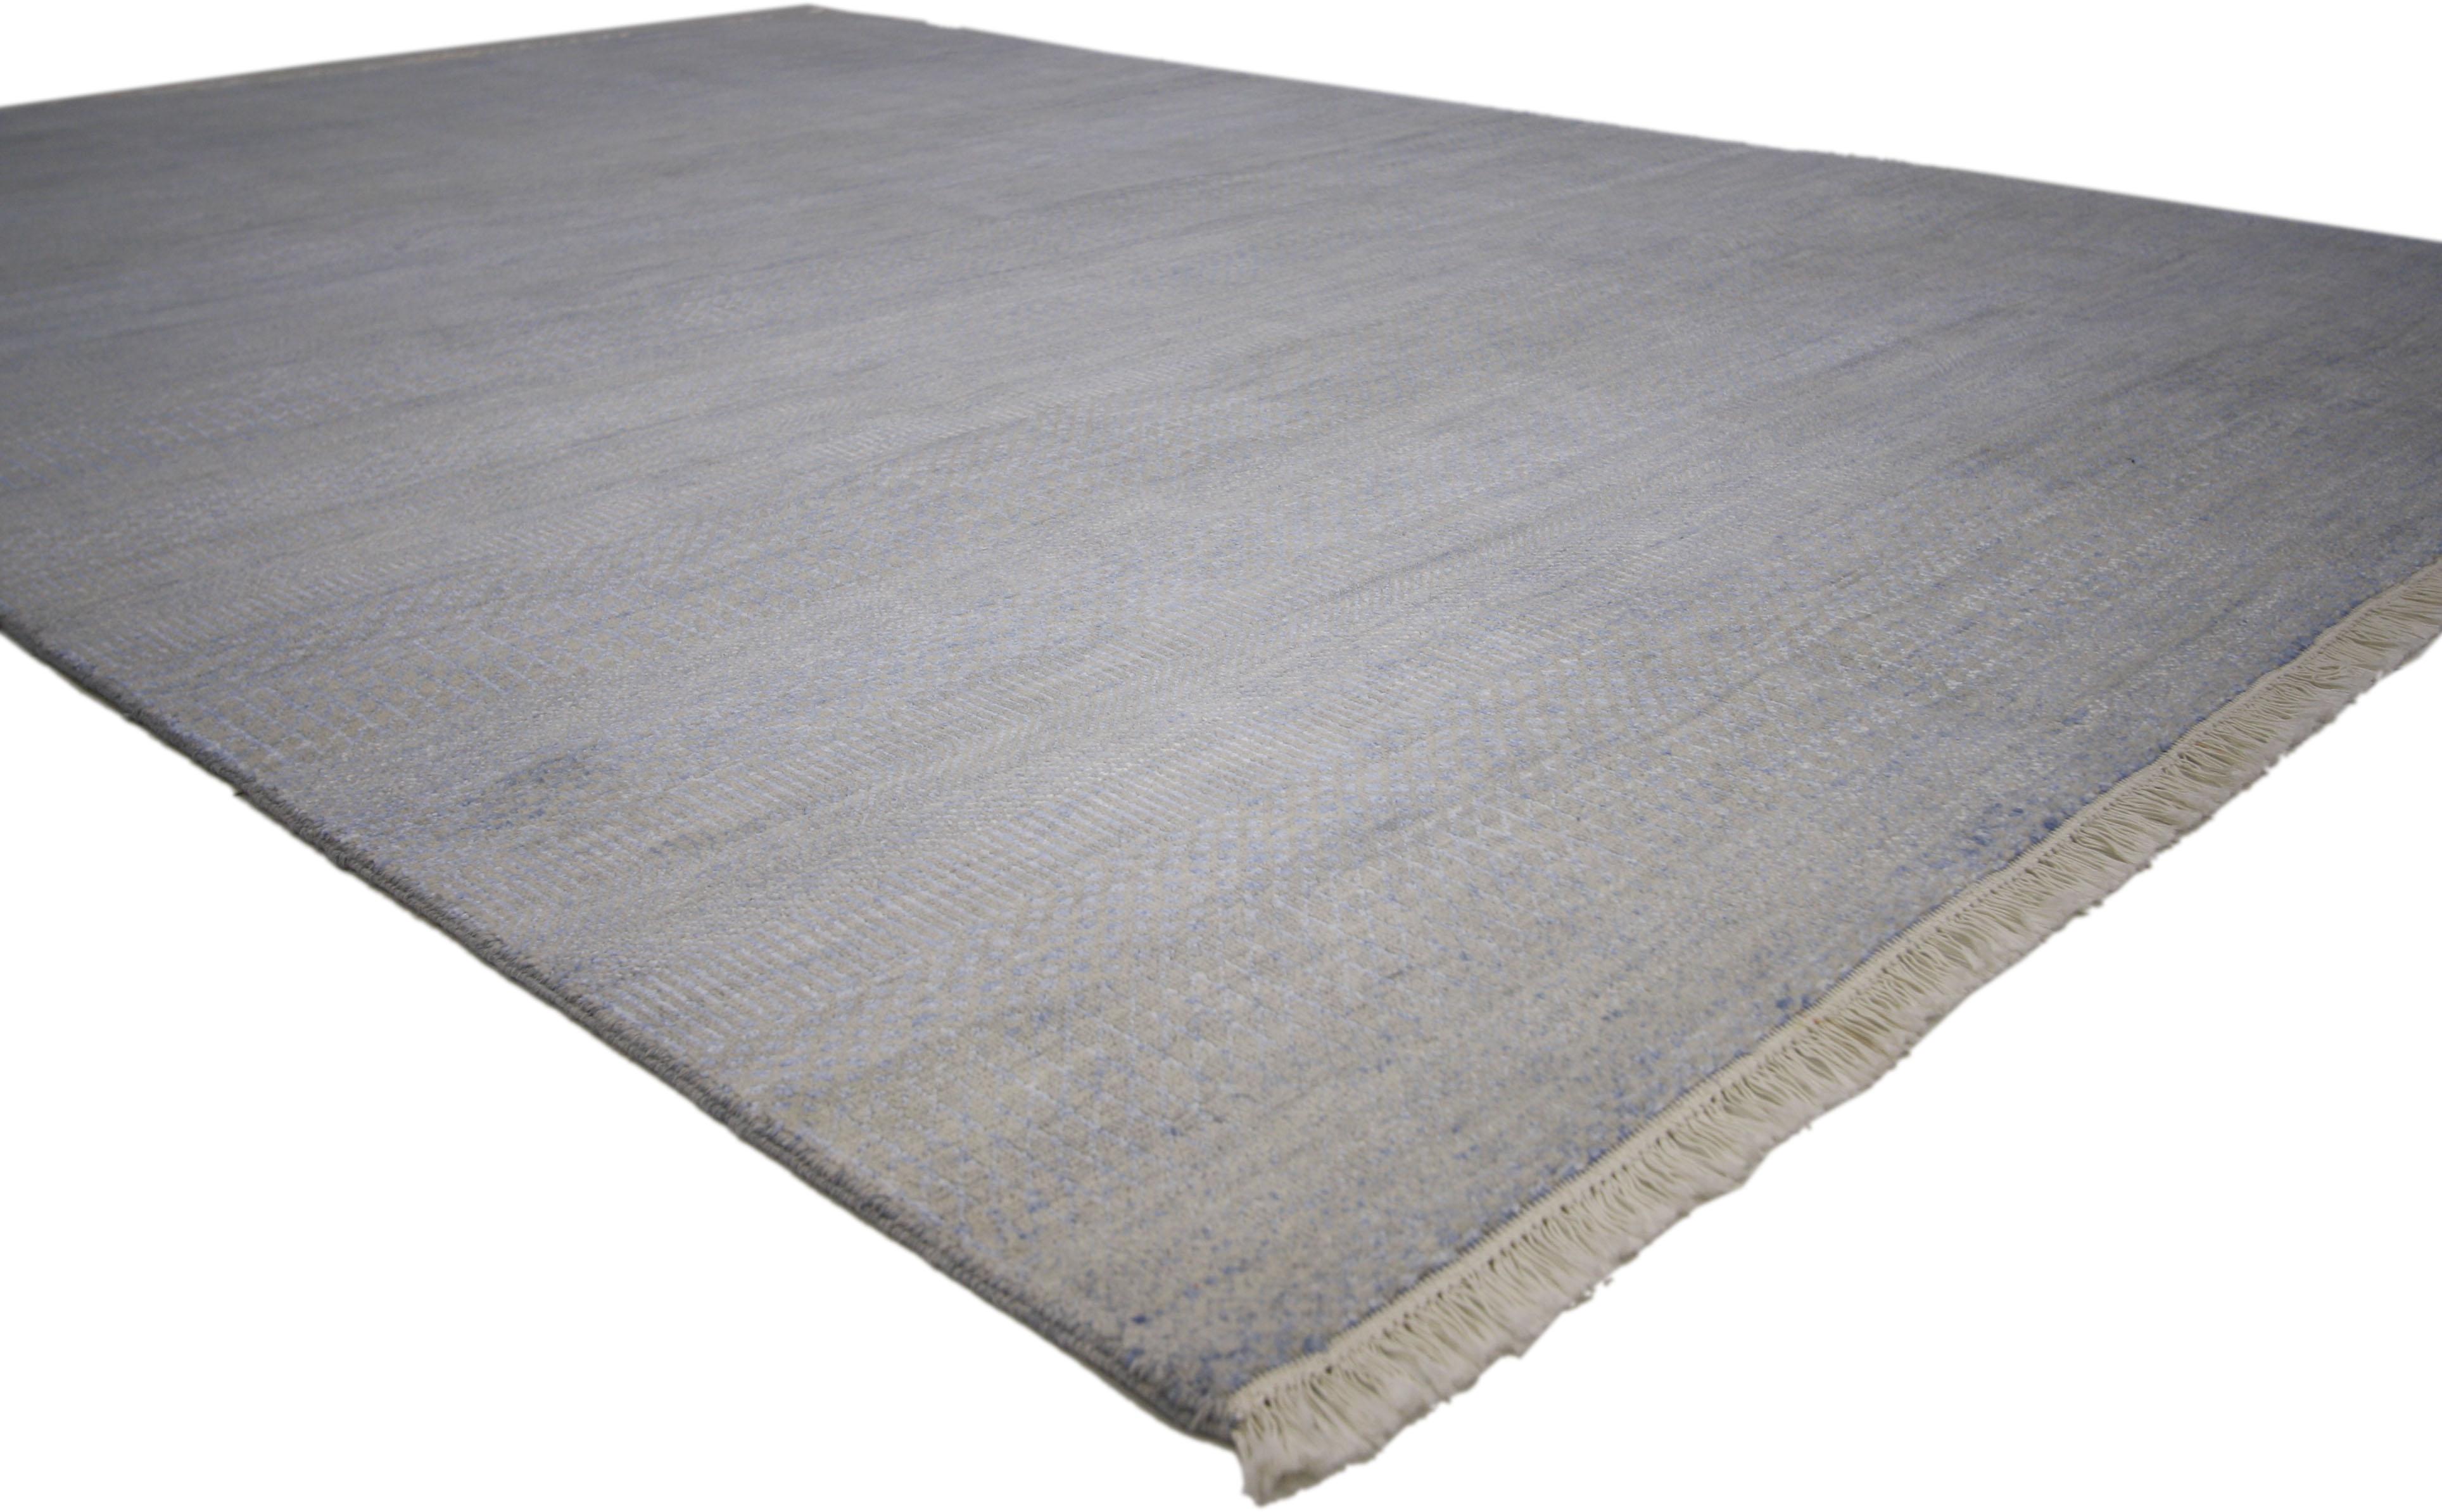 30145 New Contemporary Transitional Area Rug with Minimalist International Style 06'00 X 08'09. Striking in its style and delicate beauty, this transitional area rug features a subtle geometric pattern and striated gradations of gray and icy bluish